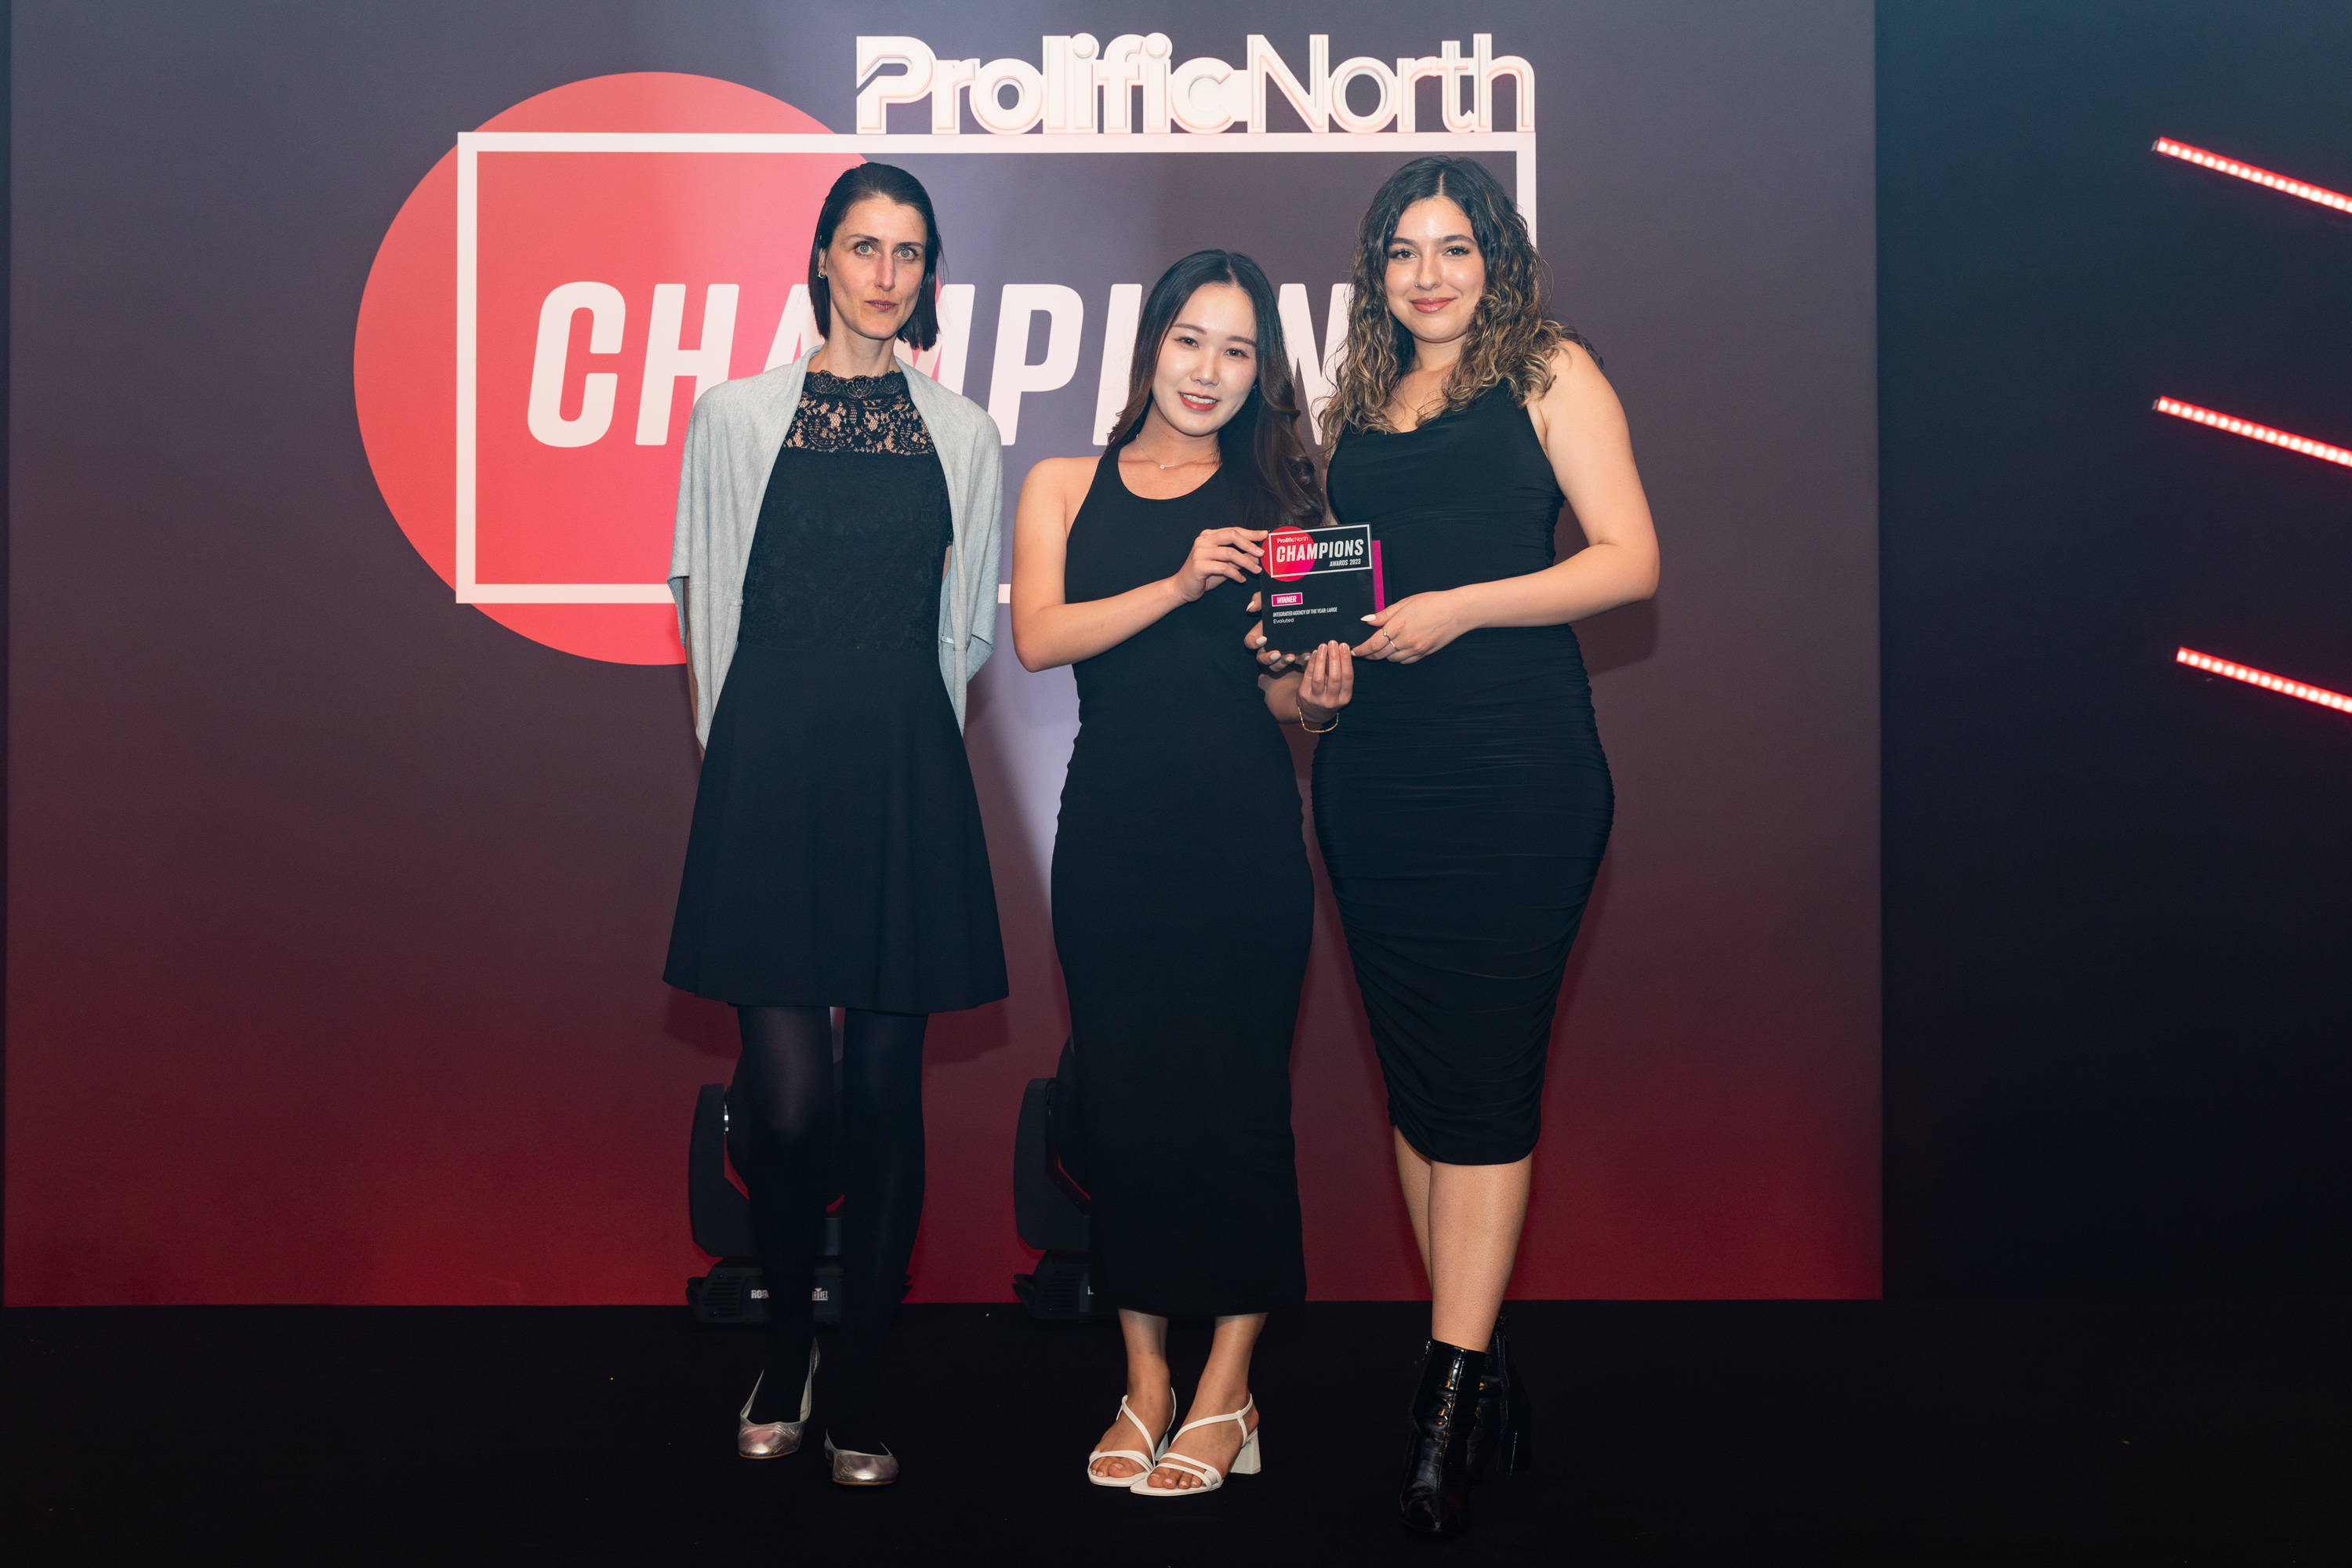 Evoluted's Joyce Lee and Amber Mukerker collect an award at the Prolific North Champions Awards